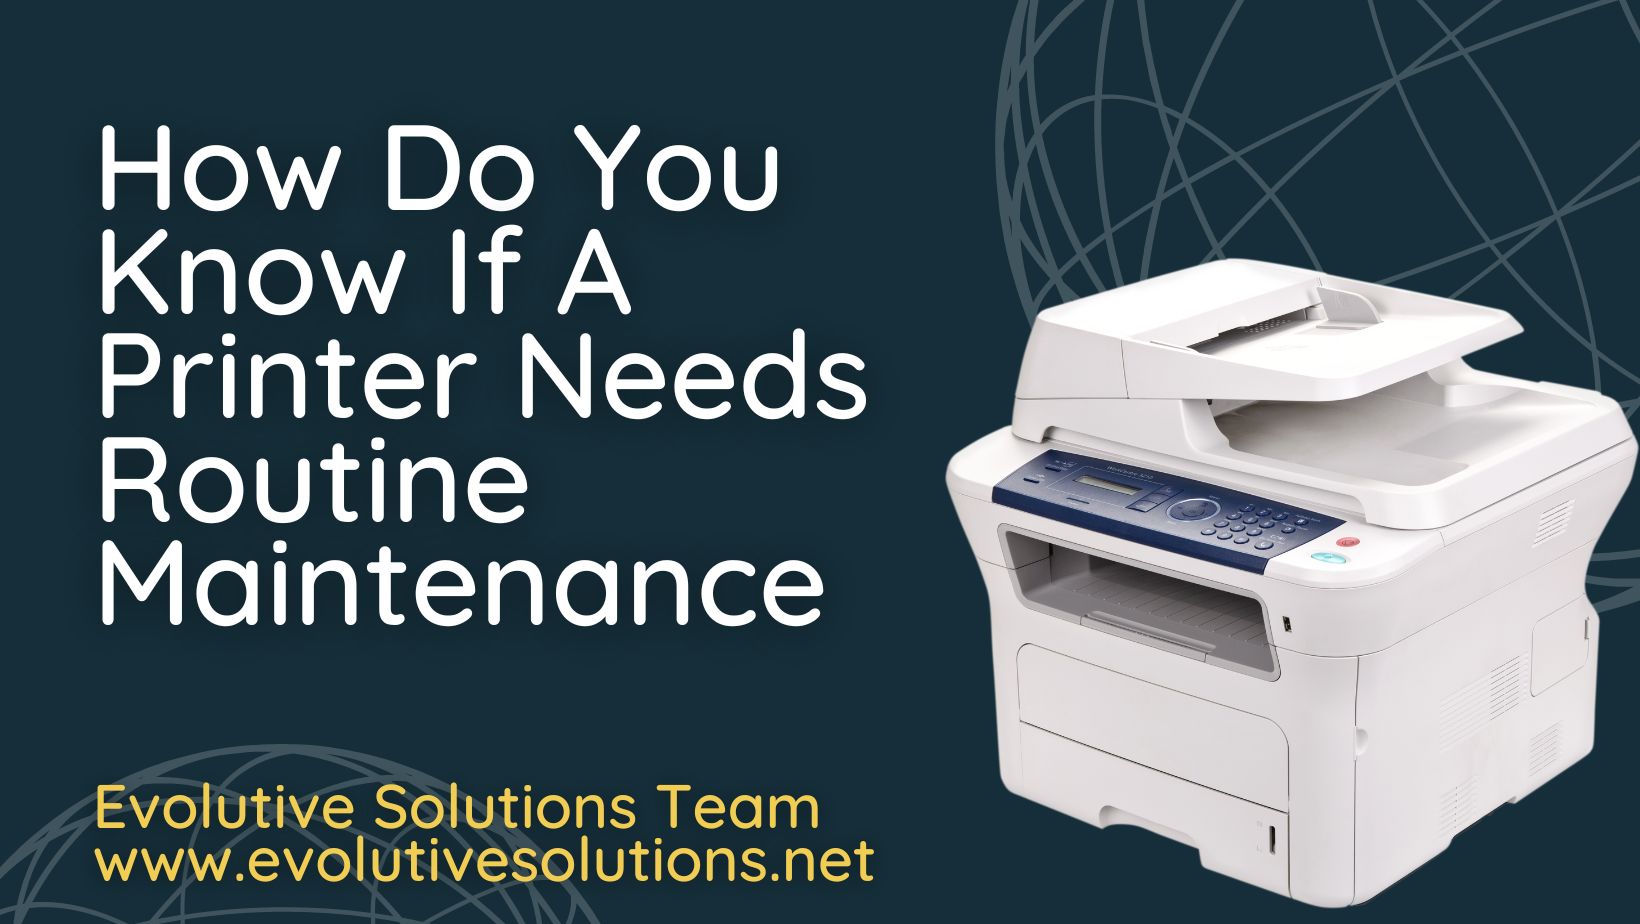 How Do You Know If A Printer Needs Routine Maintenance?